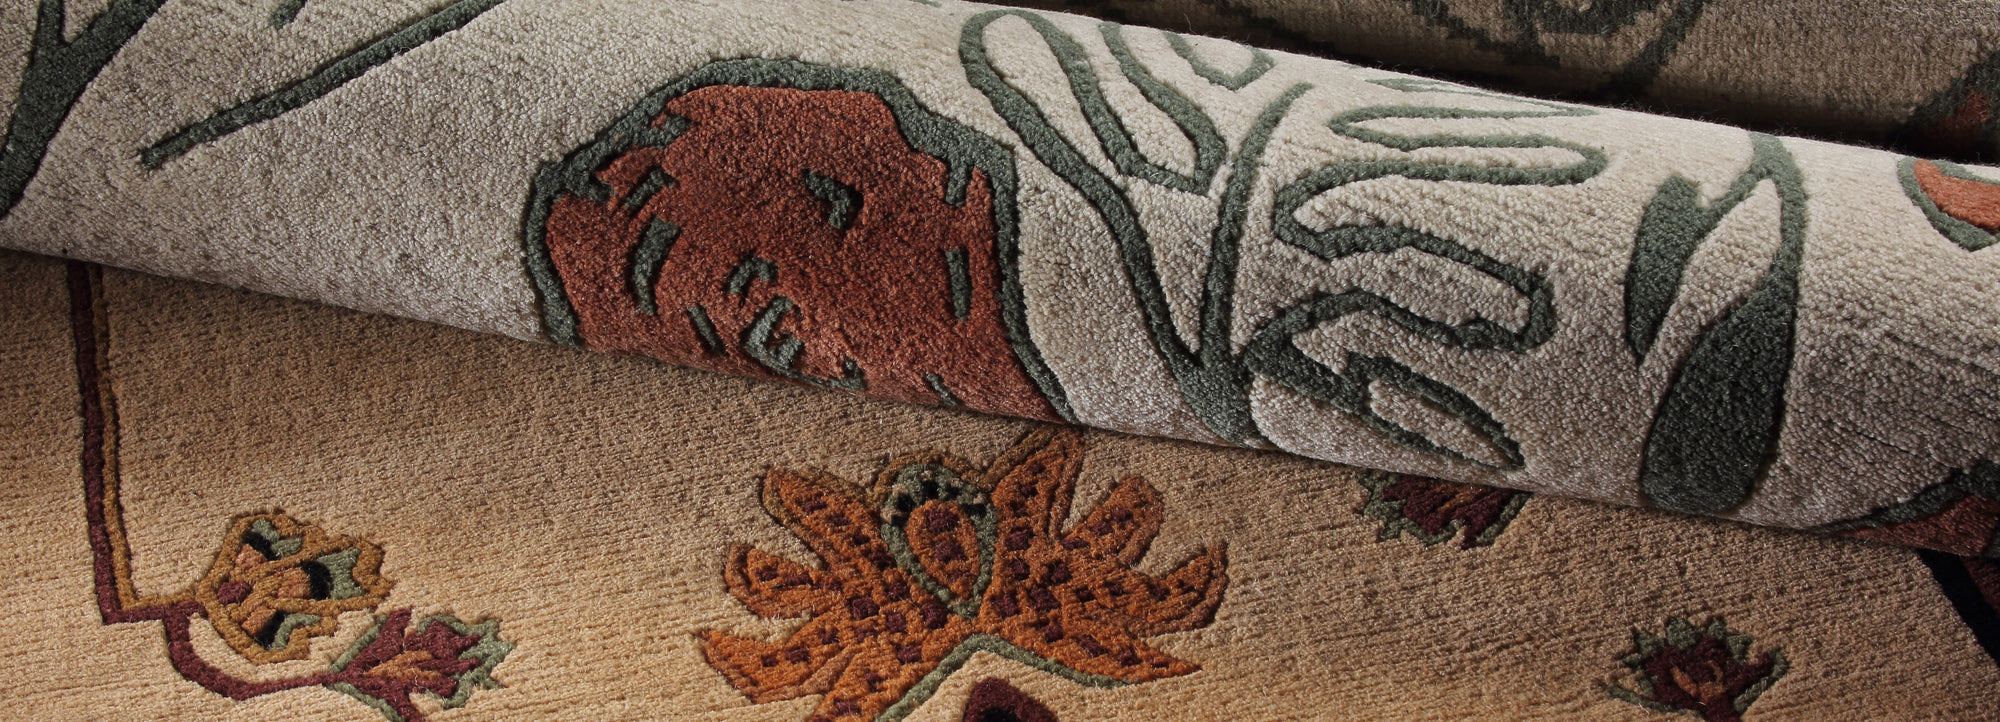 Closeup of two Stickley Designer rugs rolled up next to each other to show their floral details